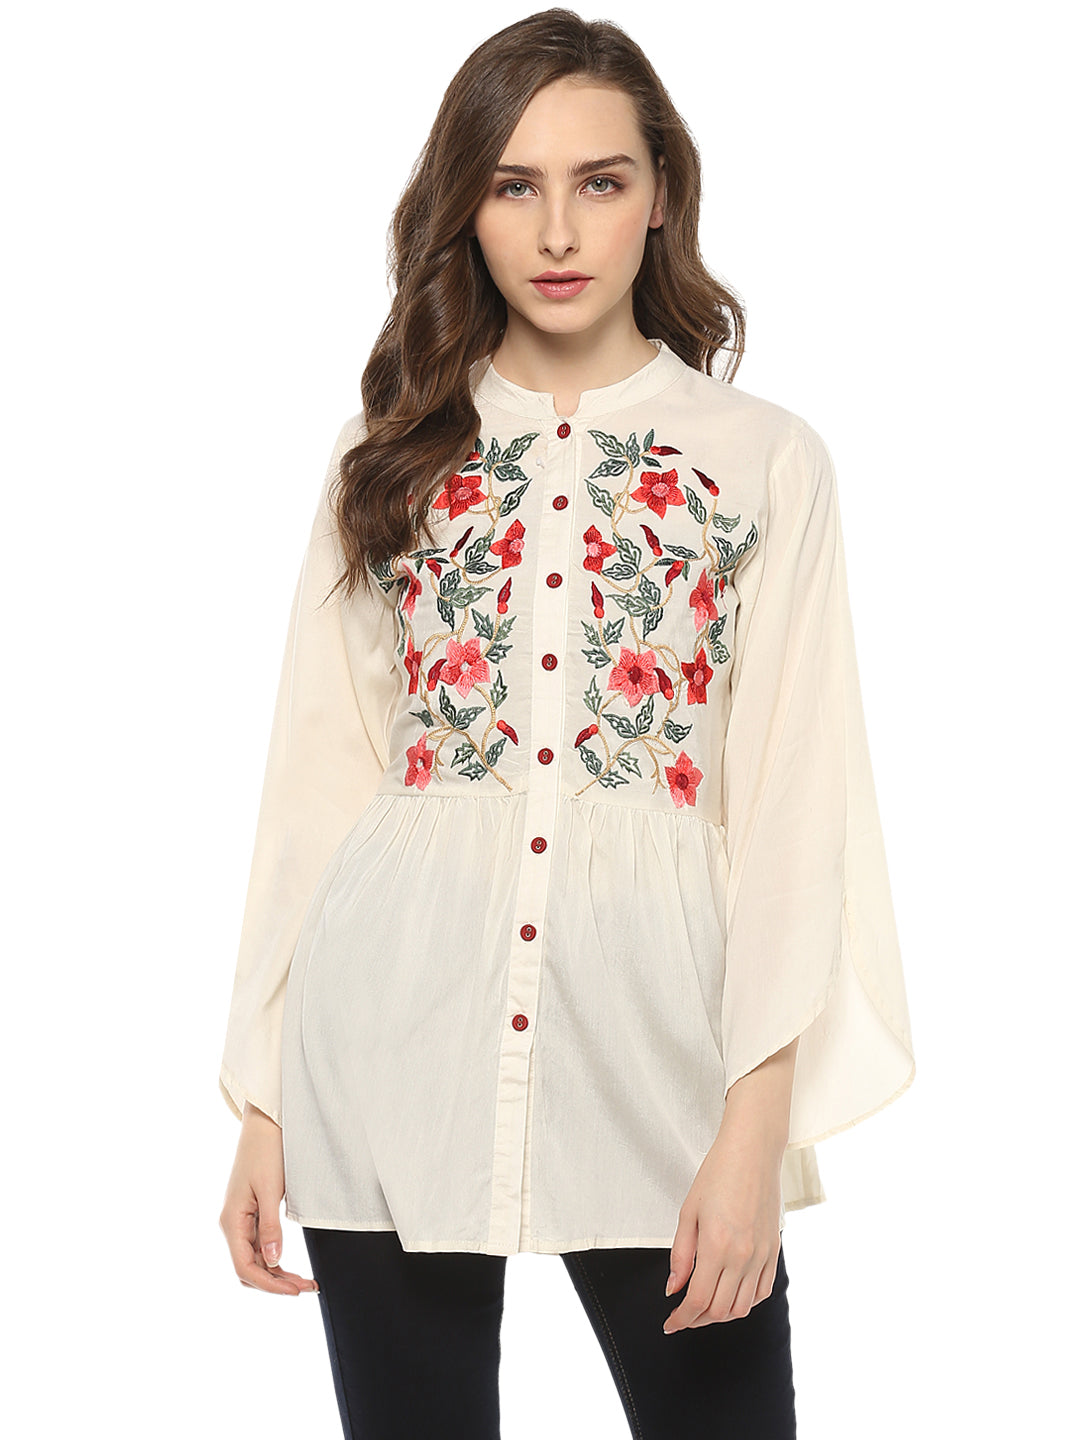 Bhama Couture Off White Embroidered Top